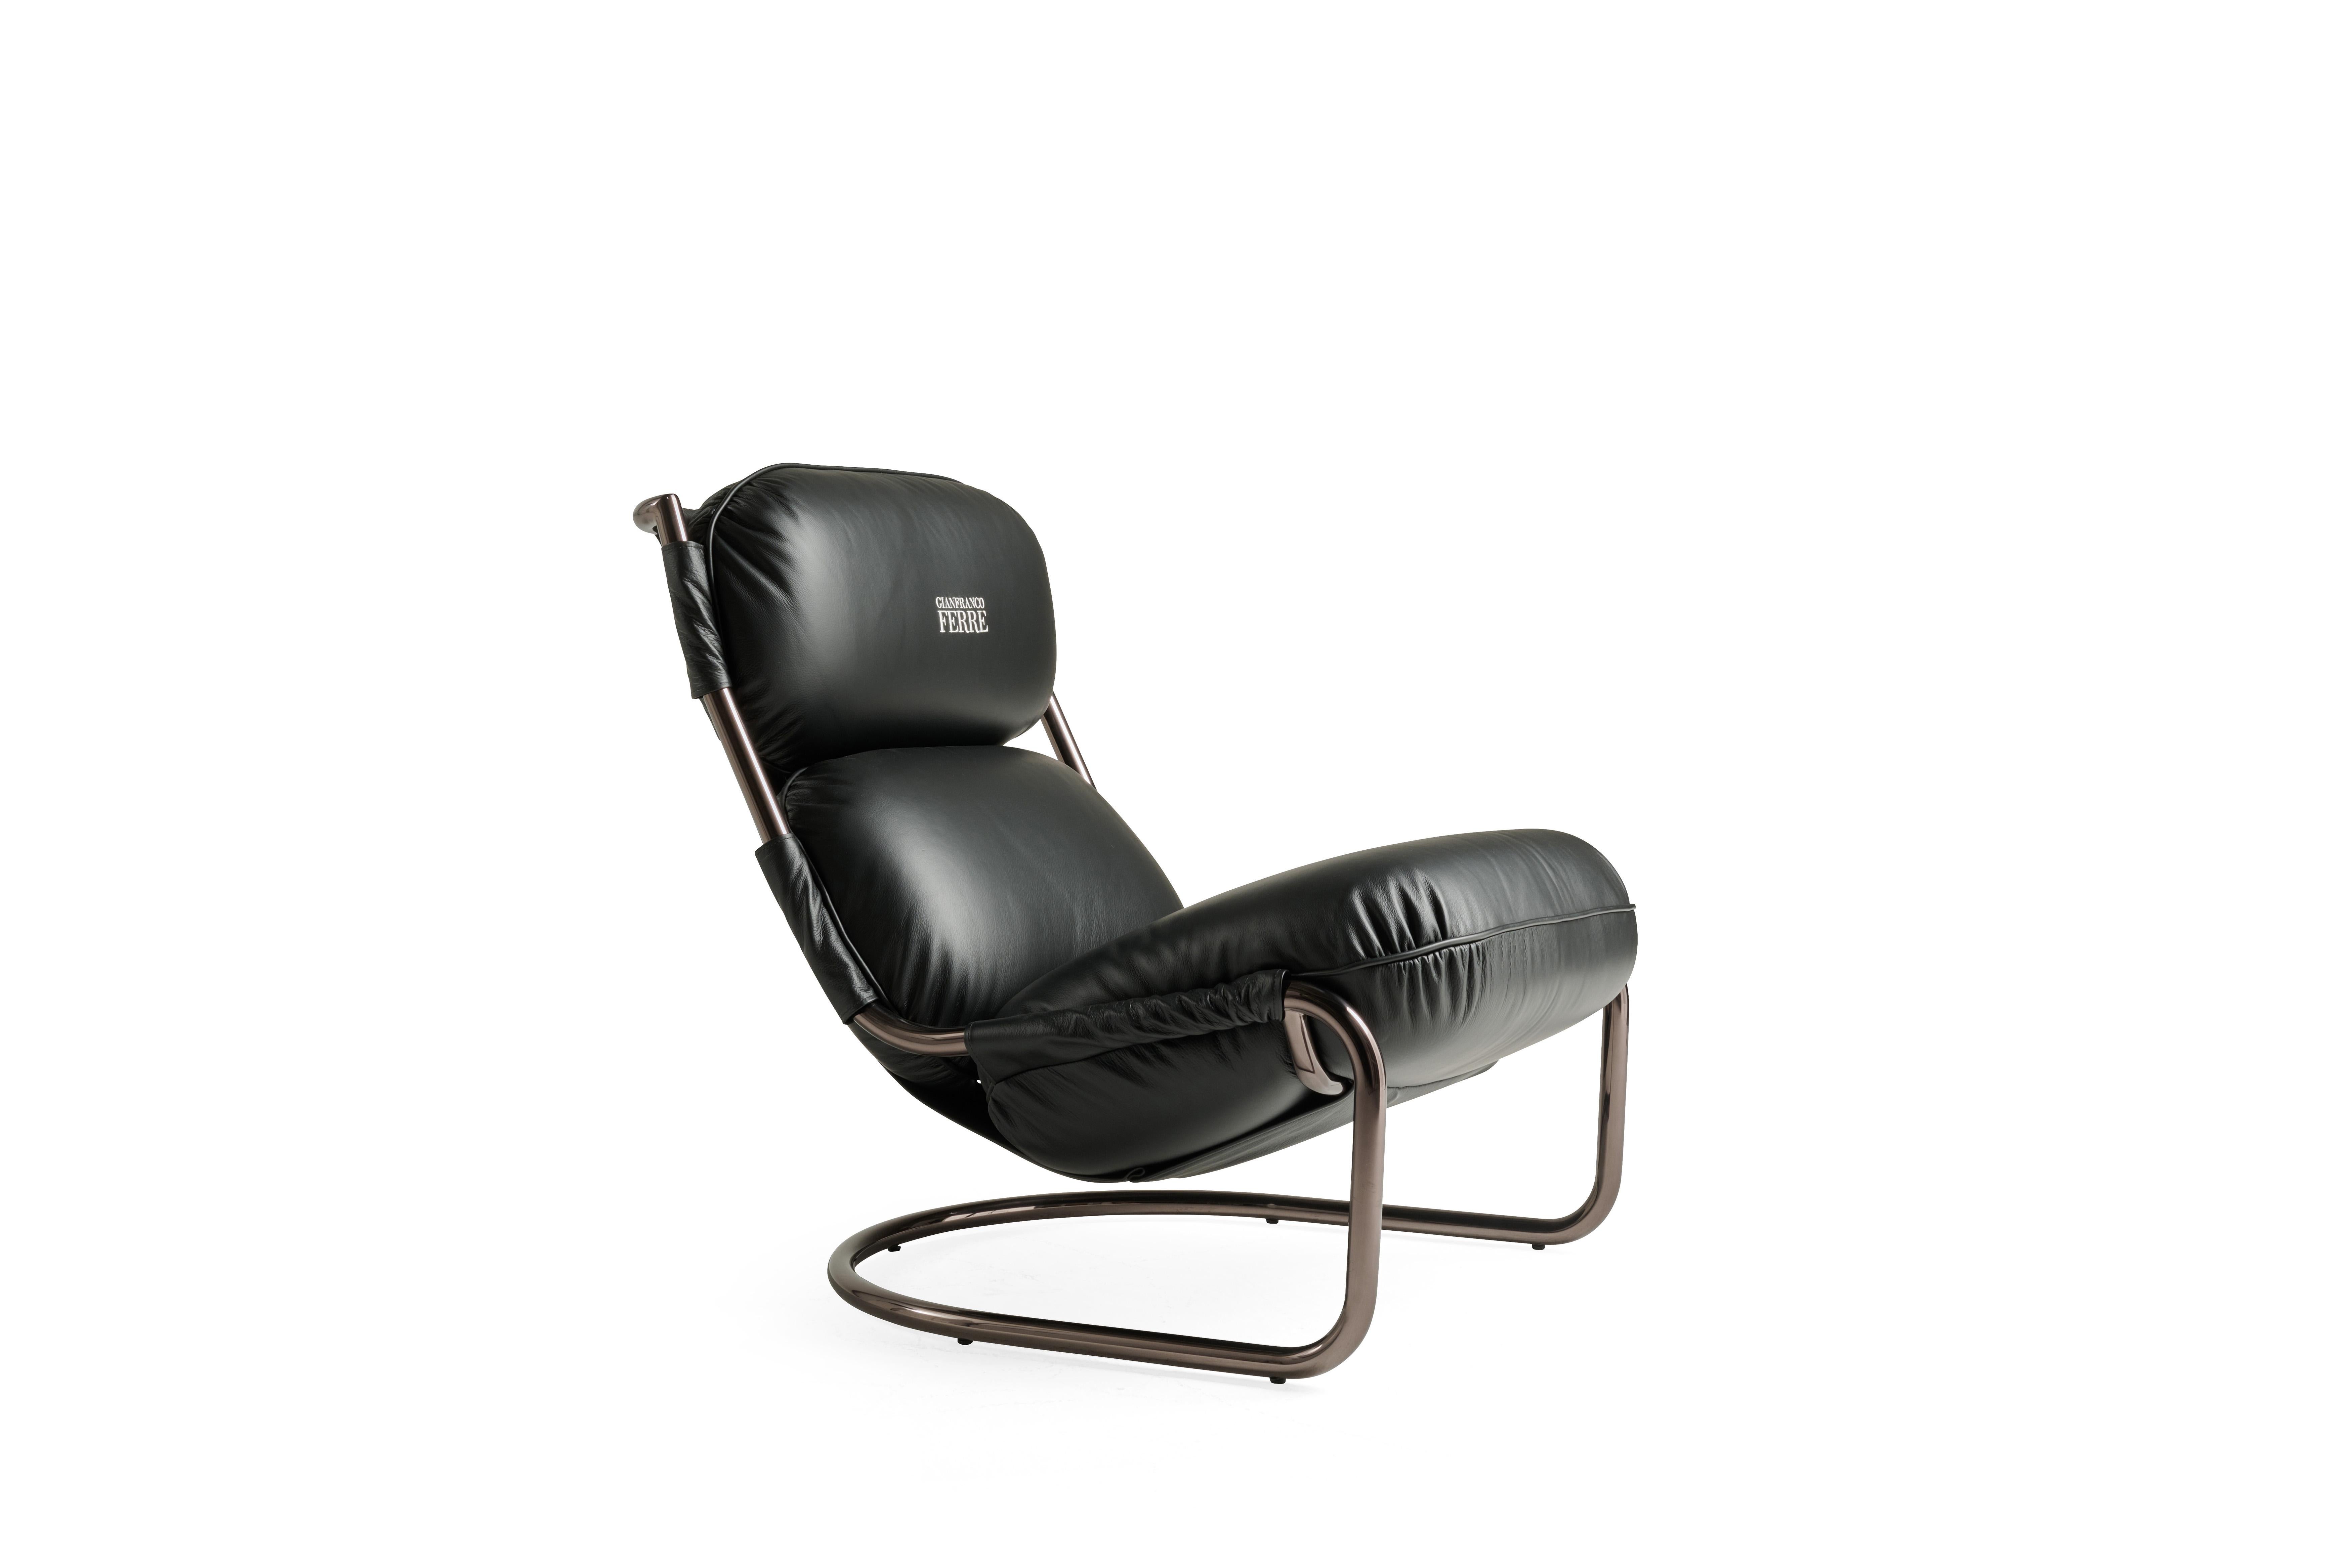 Captivating lines and retrò inspiration for the Columbus armchair. Featuring a tall seatback and a generous seat, the armchair combines an inviting aesthetic with the highest level of comfort.
Columbus armchair with structure in metal with Black